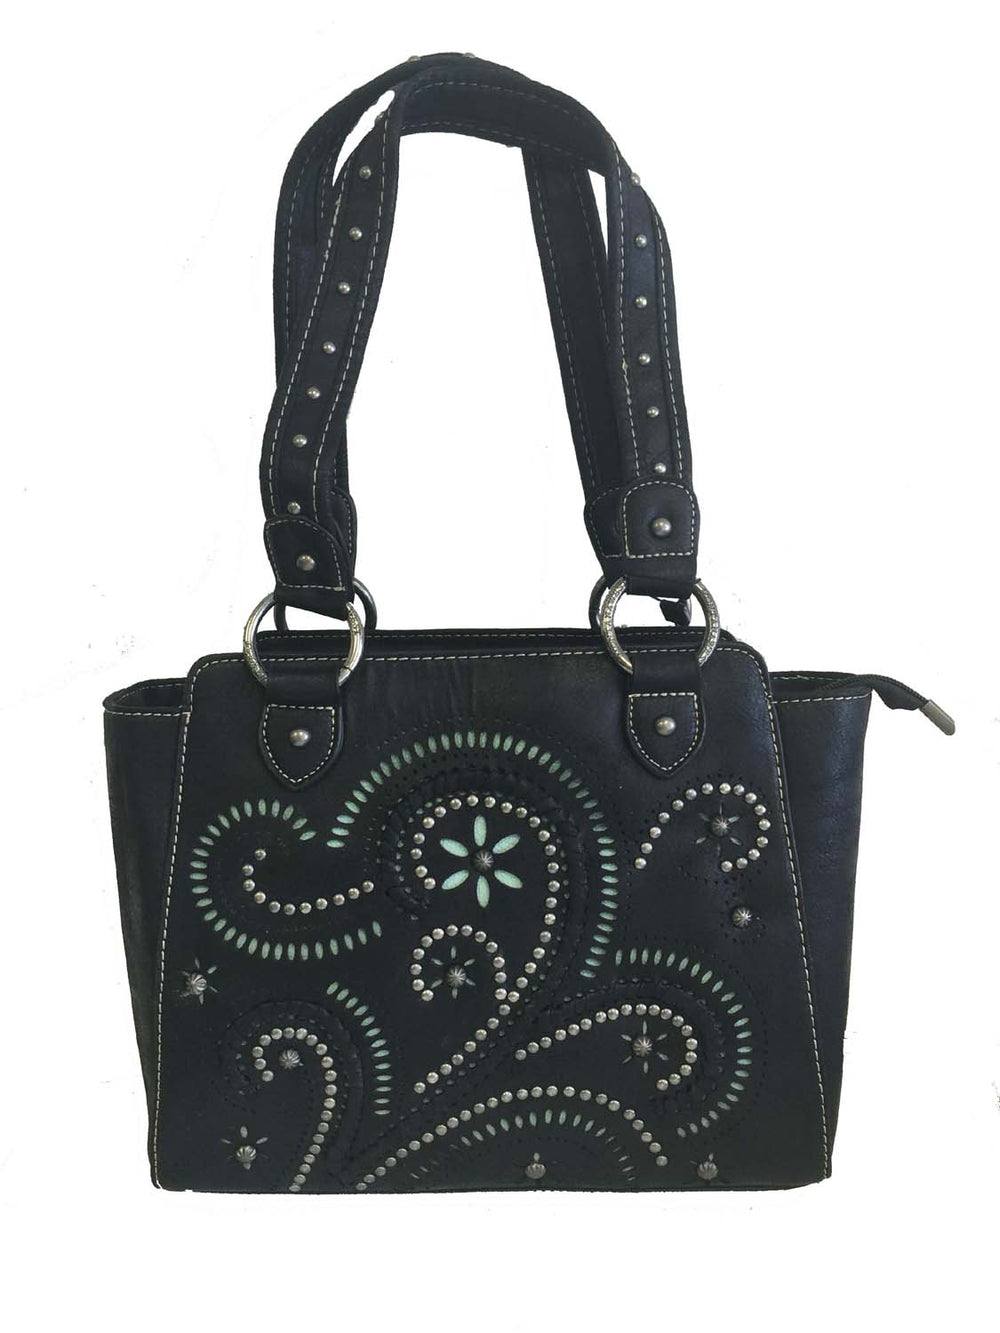 Concealed Carry Swirl Purse in black